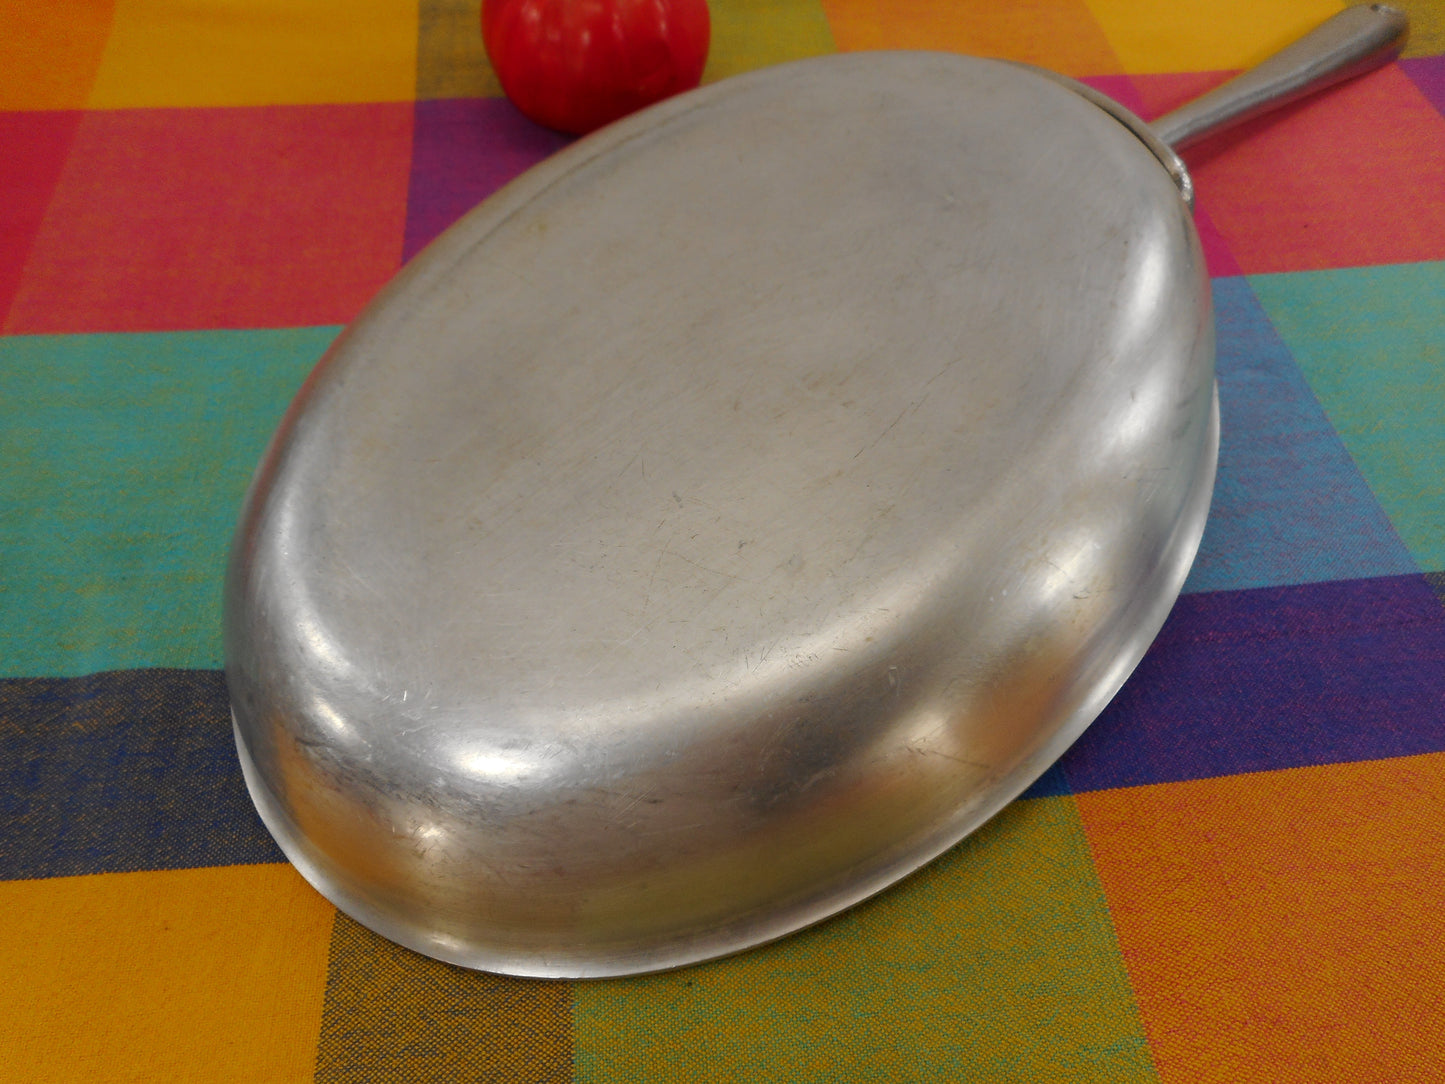 Unbranded All Aluminum Stainless Clad Interior 12" Oval Skillet Fish Pan - Handle Defect Used